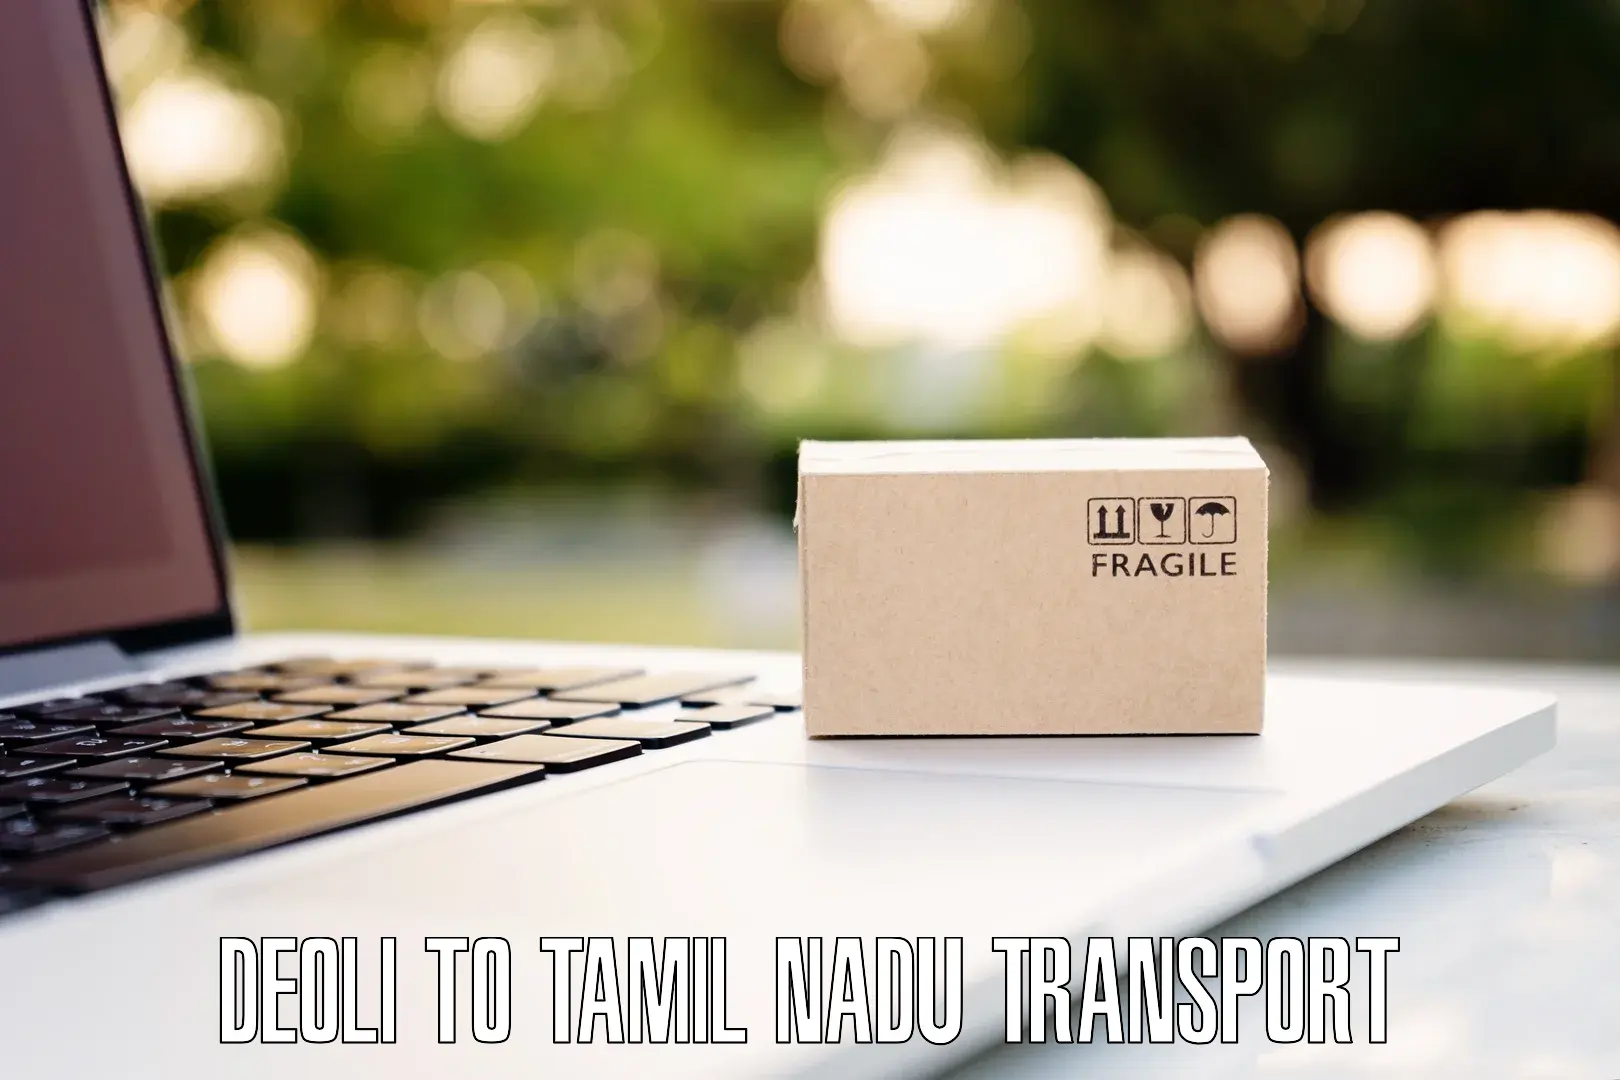 Express transport services Deoli to Coimbatore